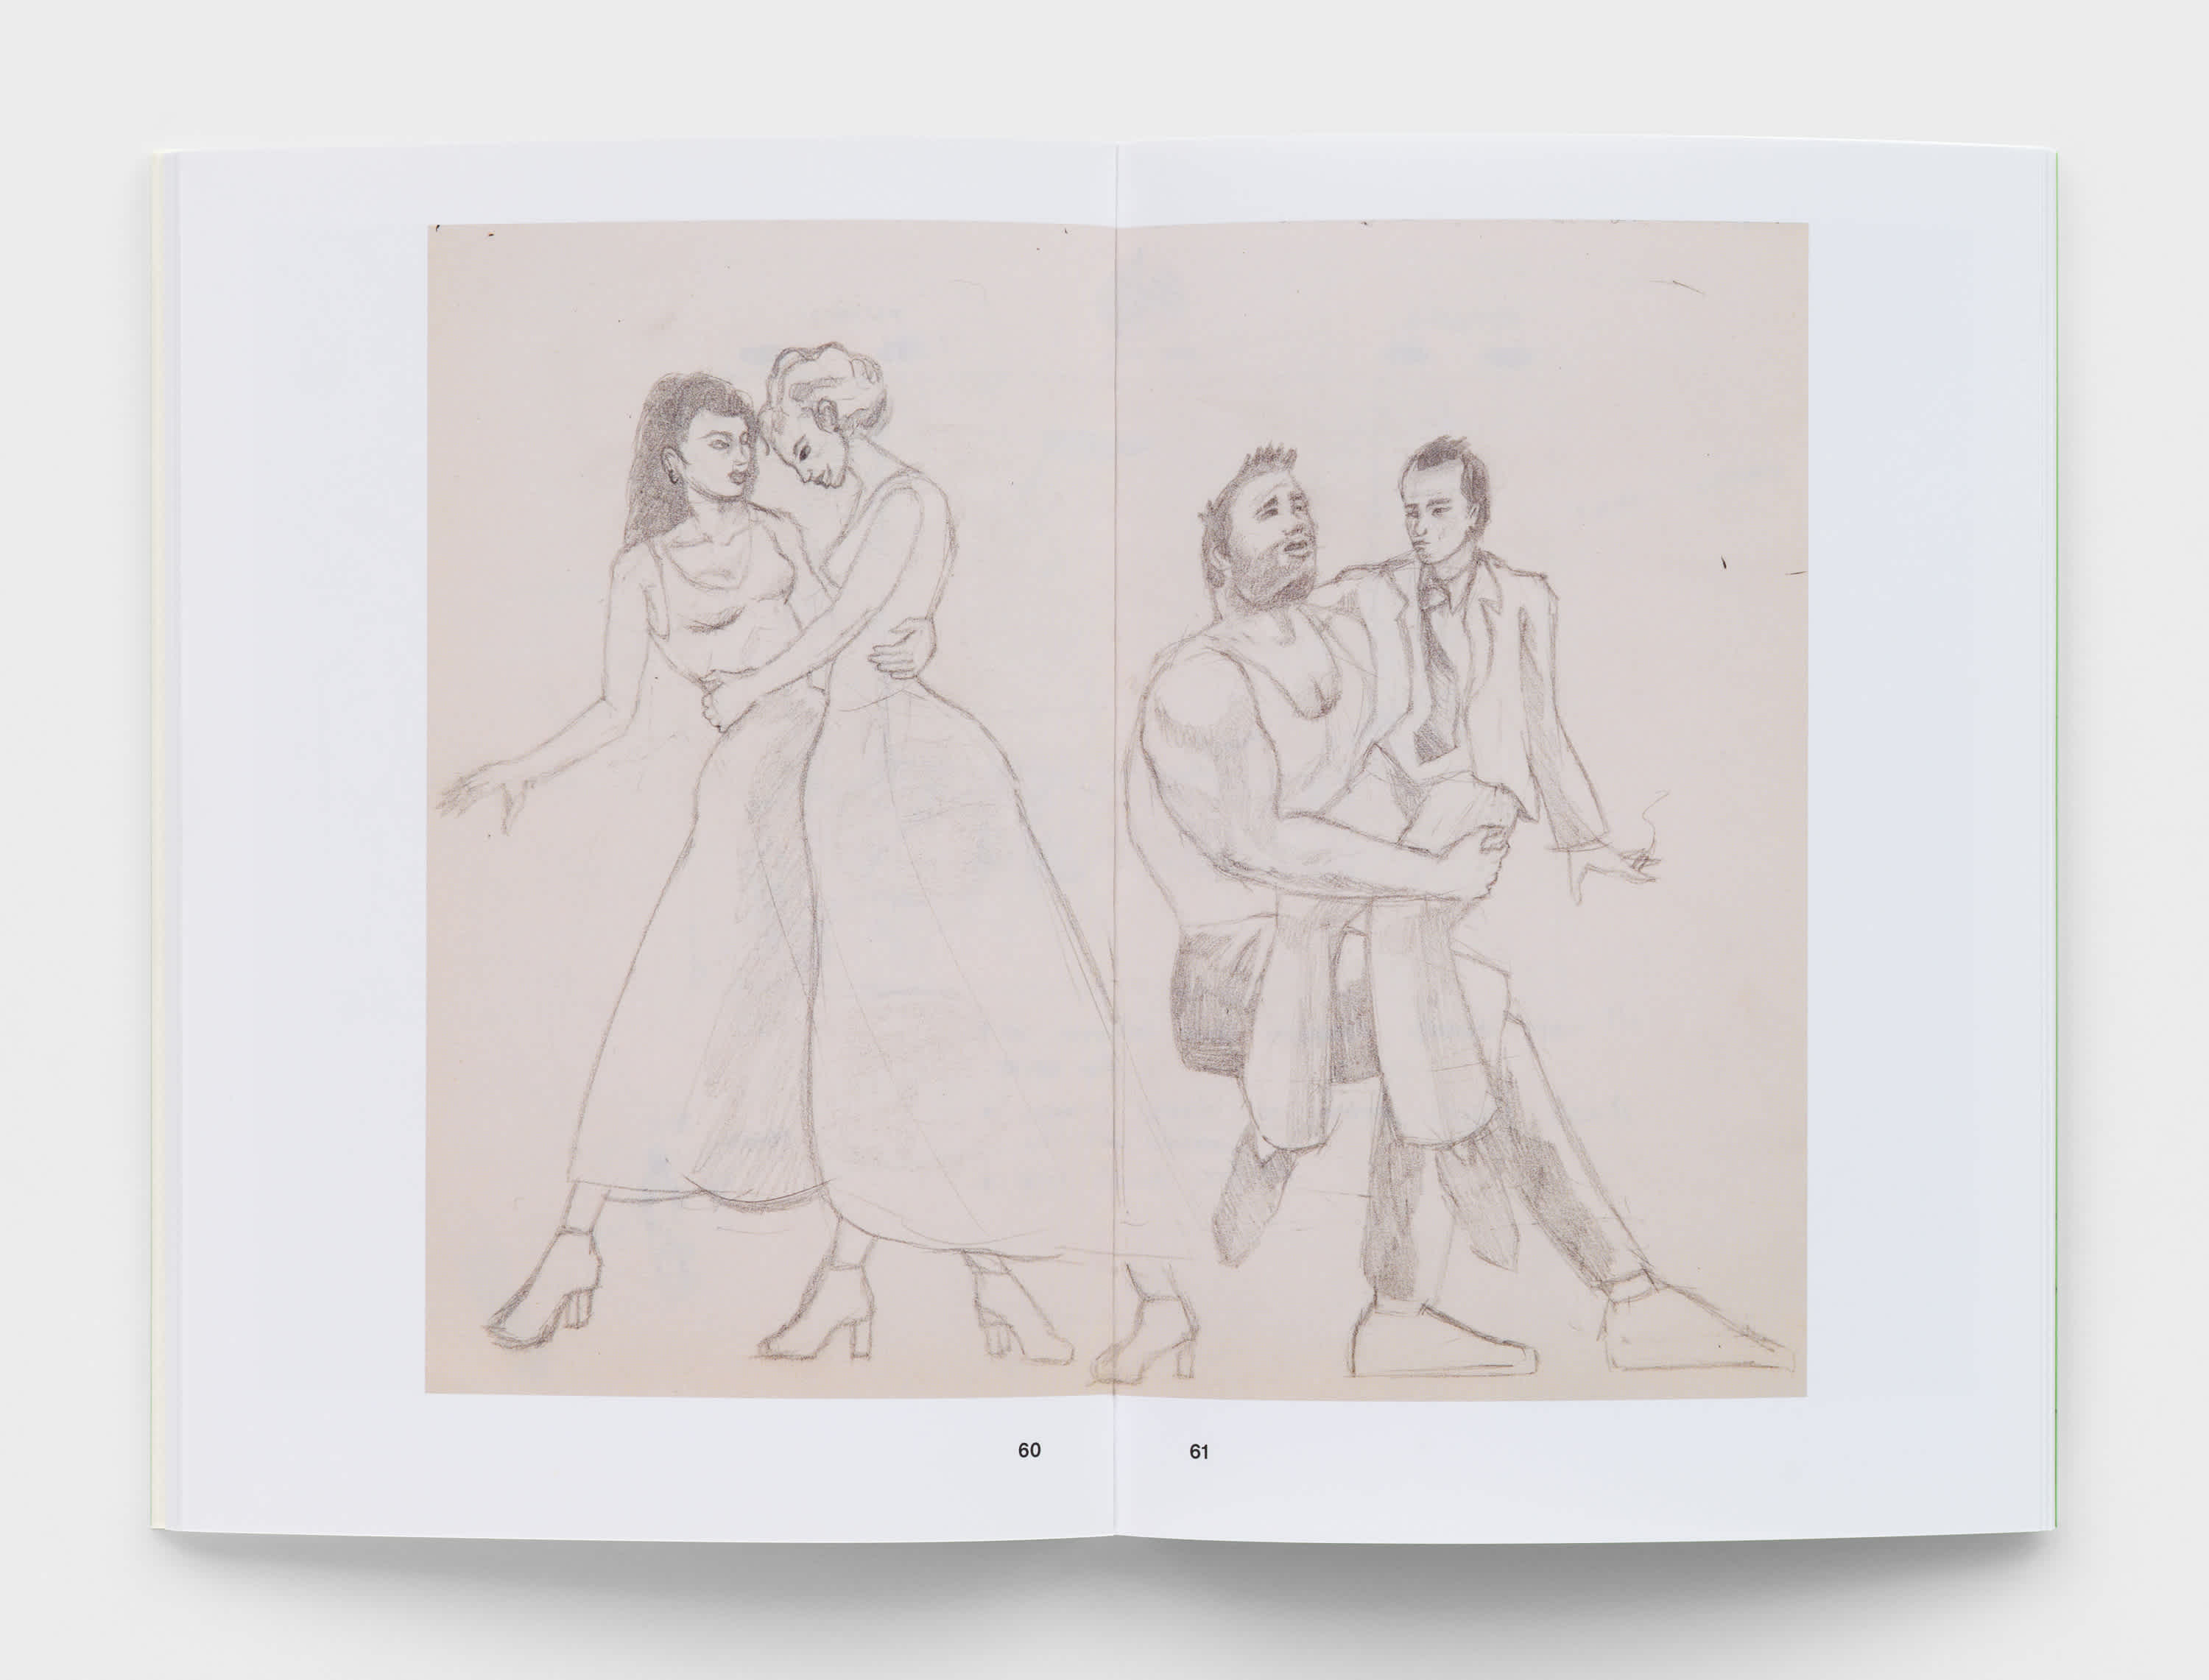 Open book with centerfold sketch of two couples embracing.